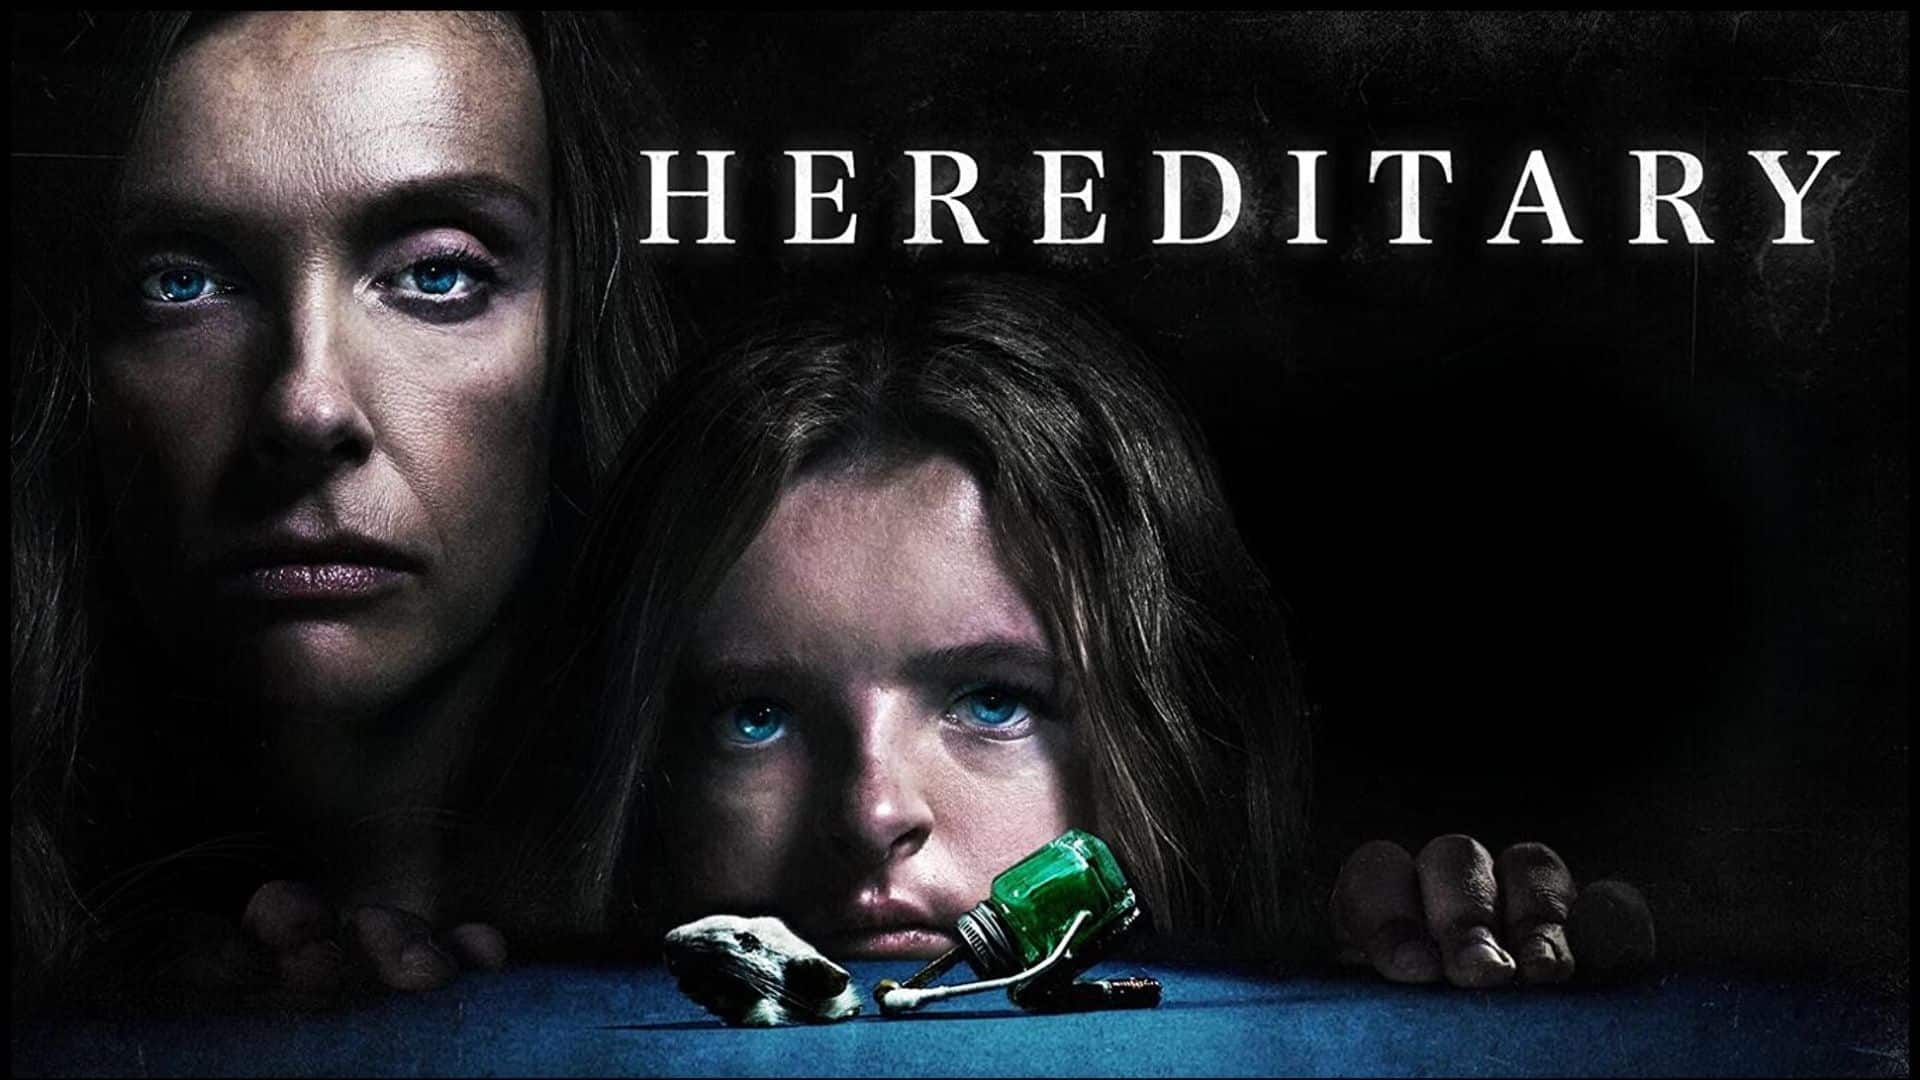 Hereditary (2018) Top Horror Movie in Hollywood